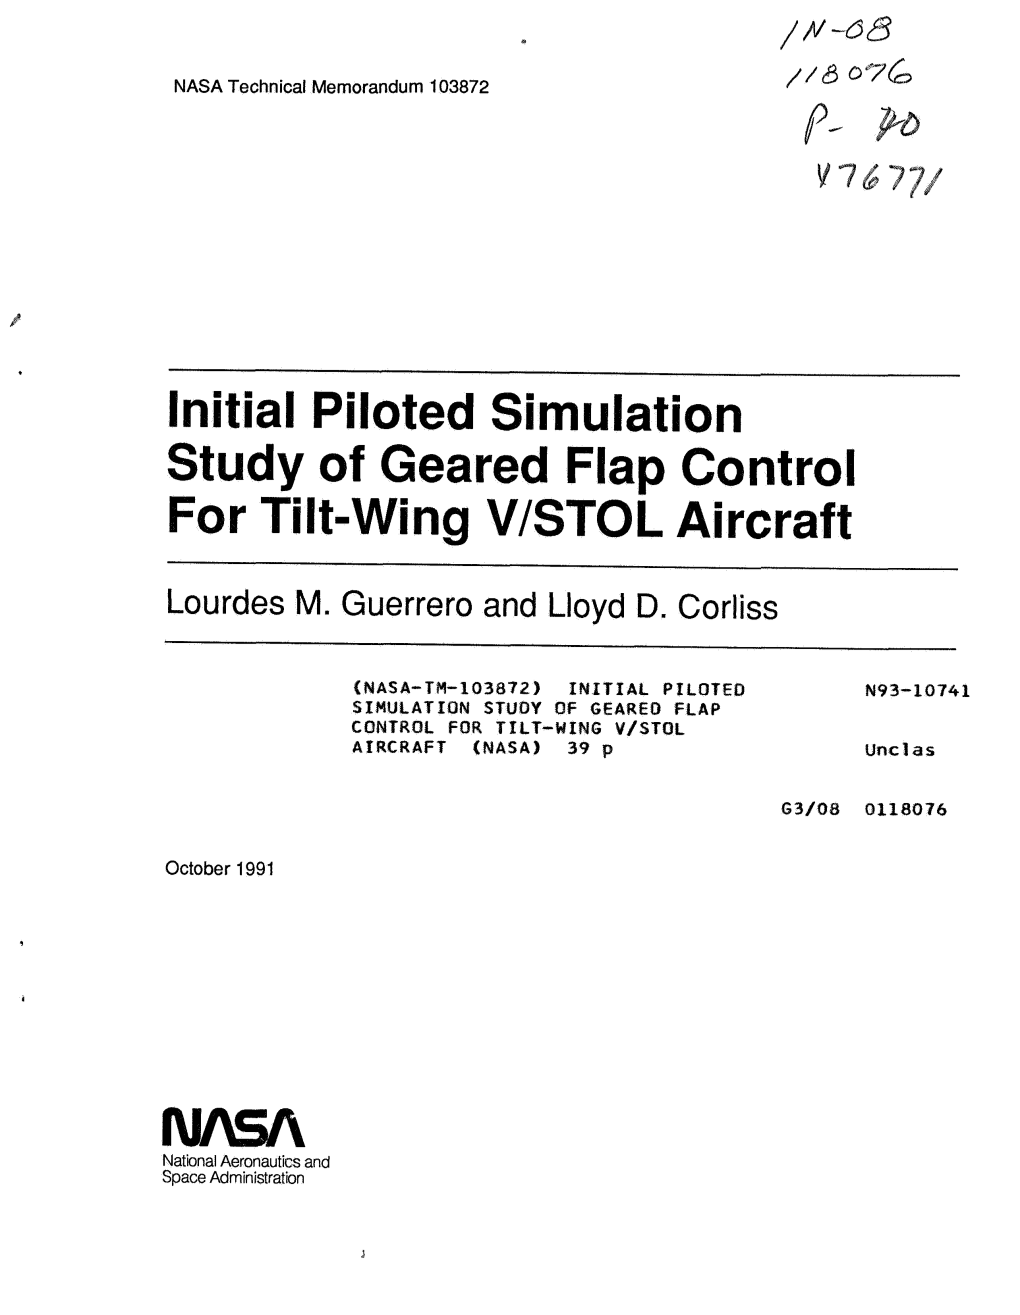 Initial Piloted Simulation Study of Geared Flap R Tilt-Wing V/STOL